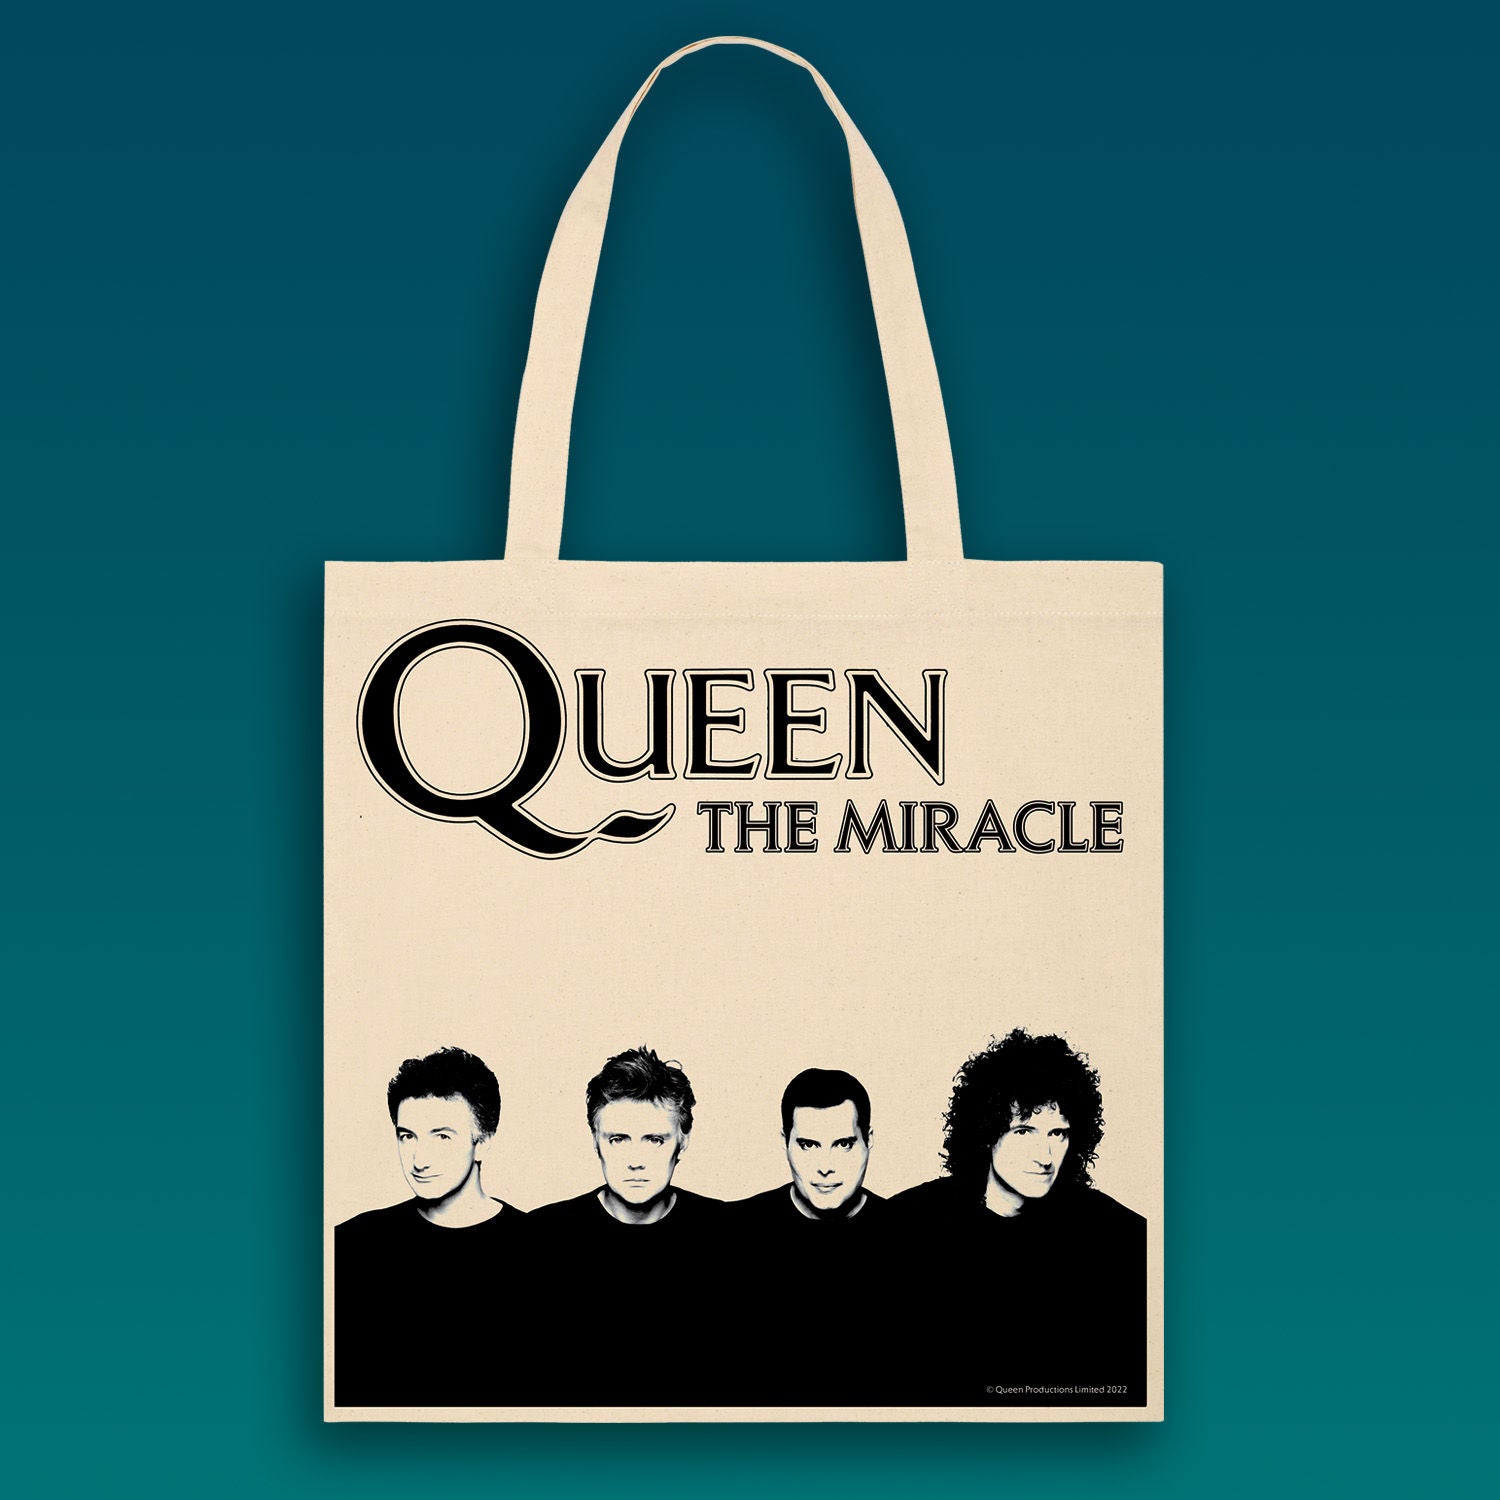 Queen - 'The Miracle' Tote Bag